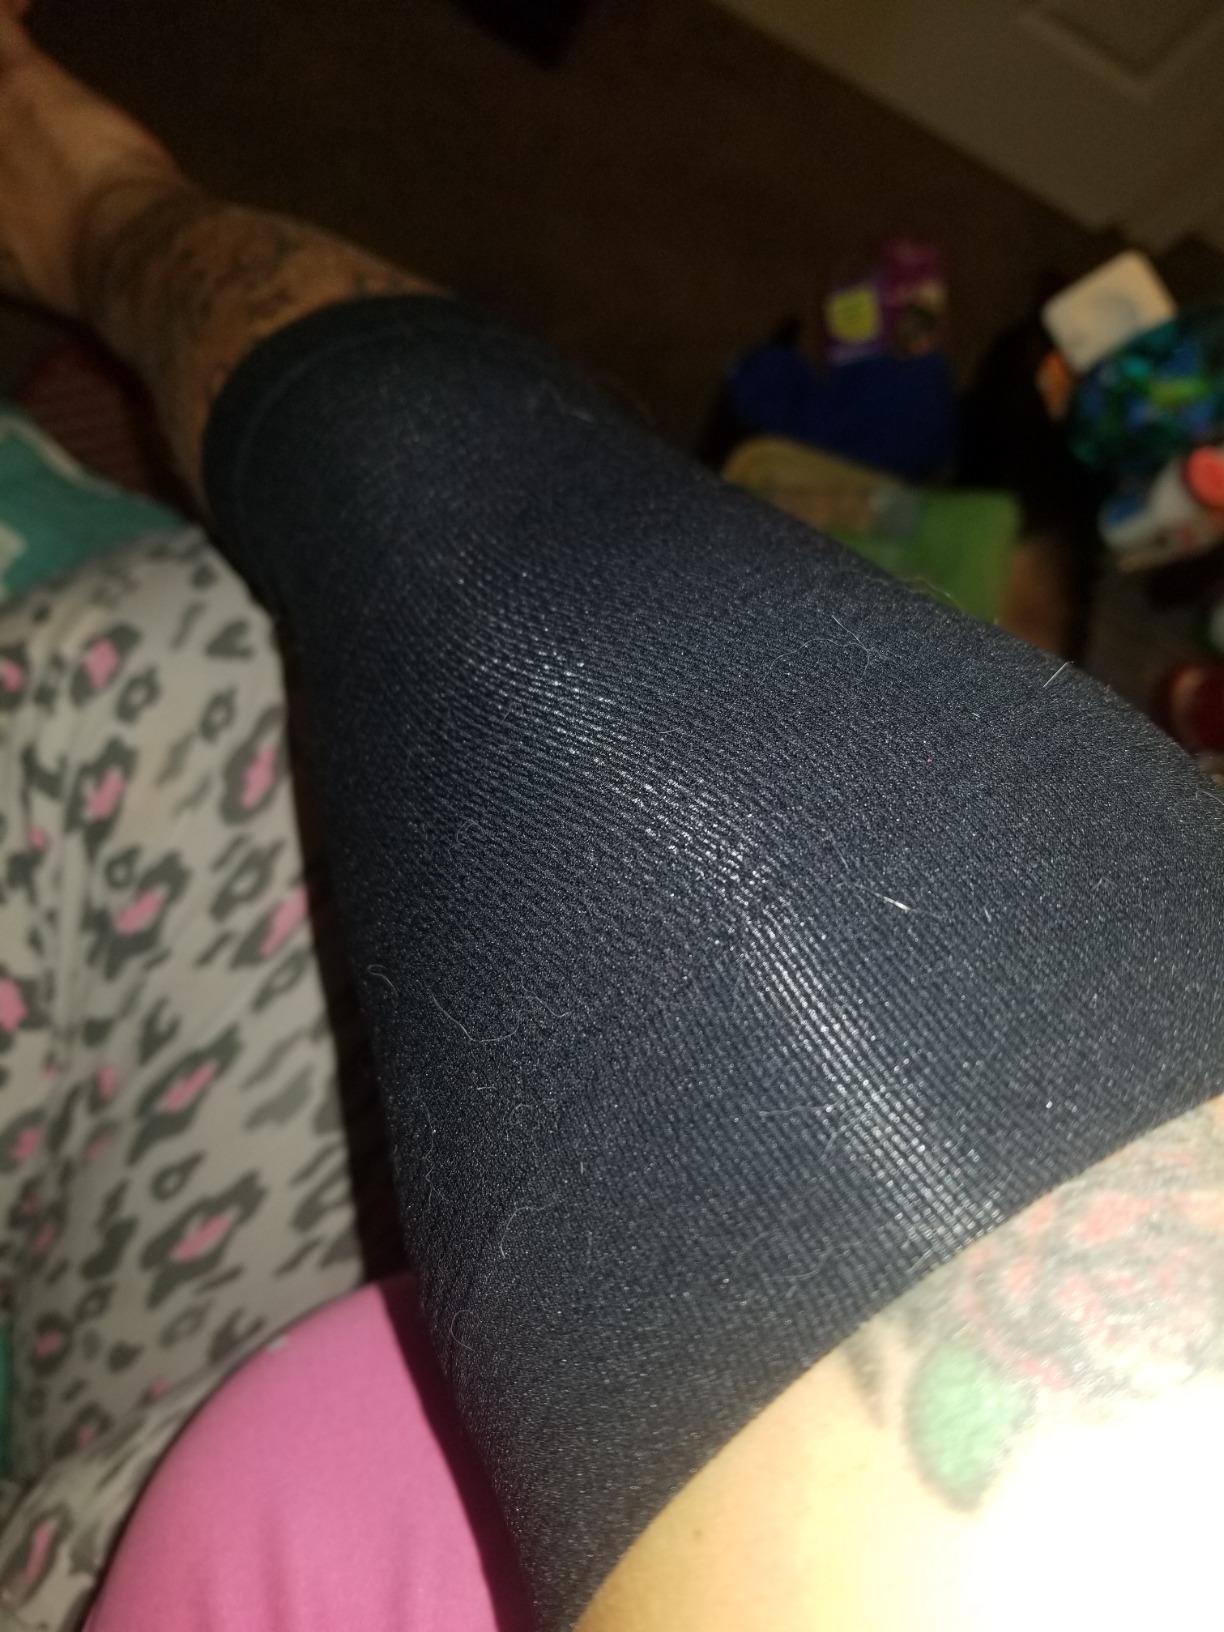 Toneup Thermal Arm Shaper Sleeves photo review